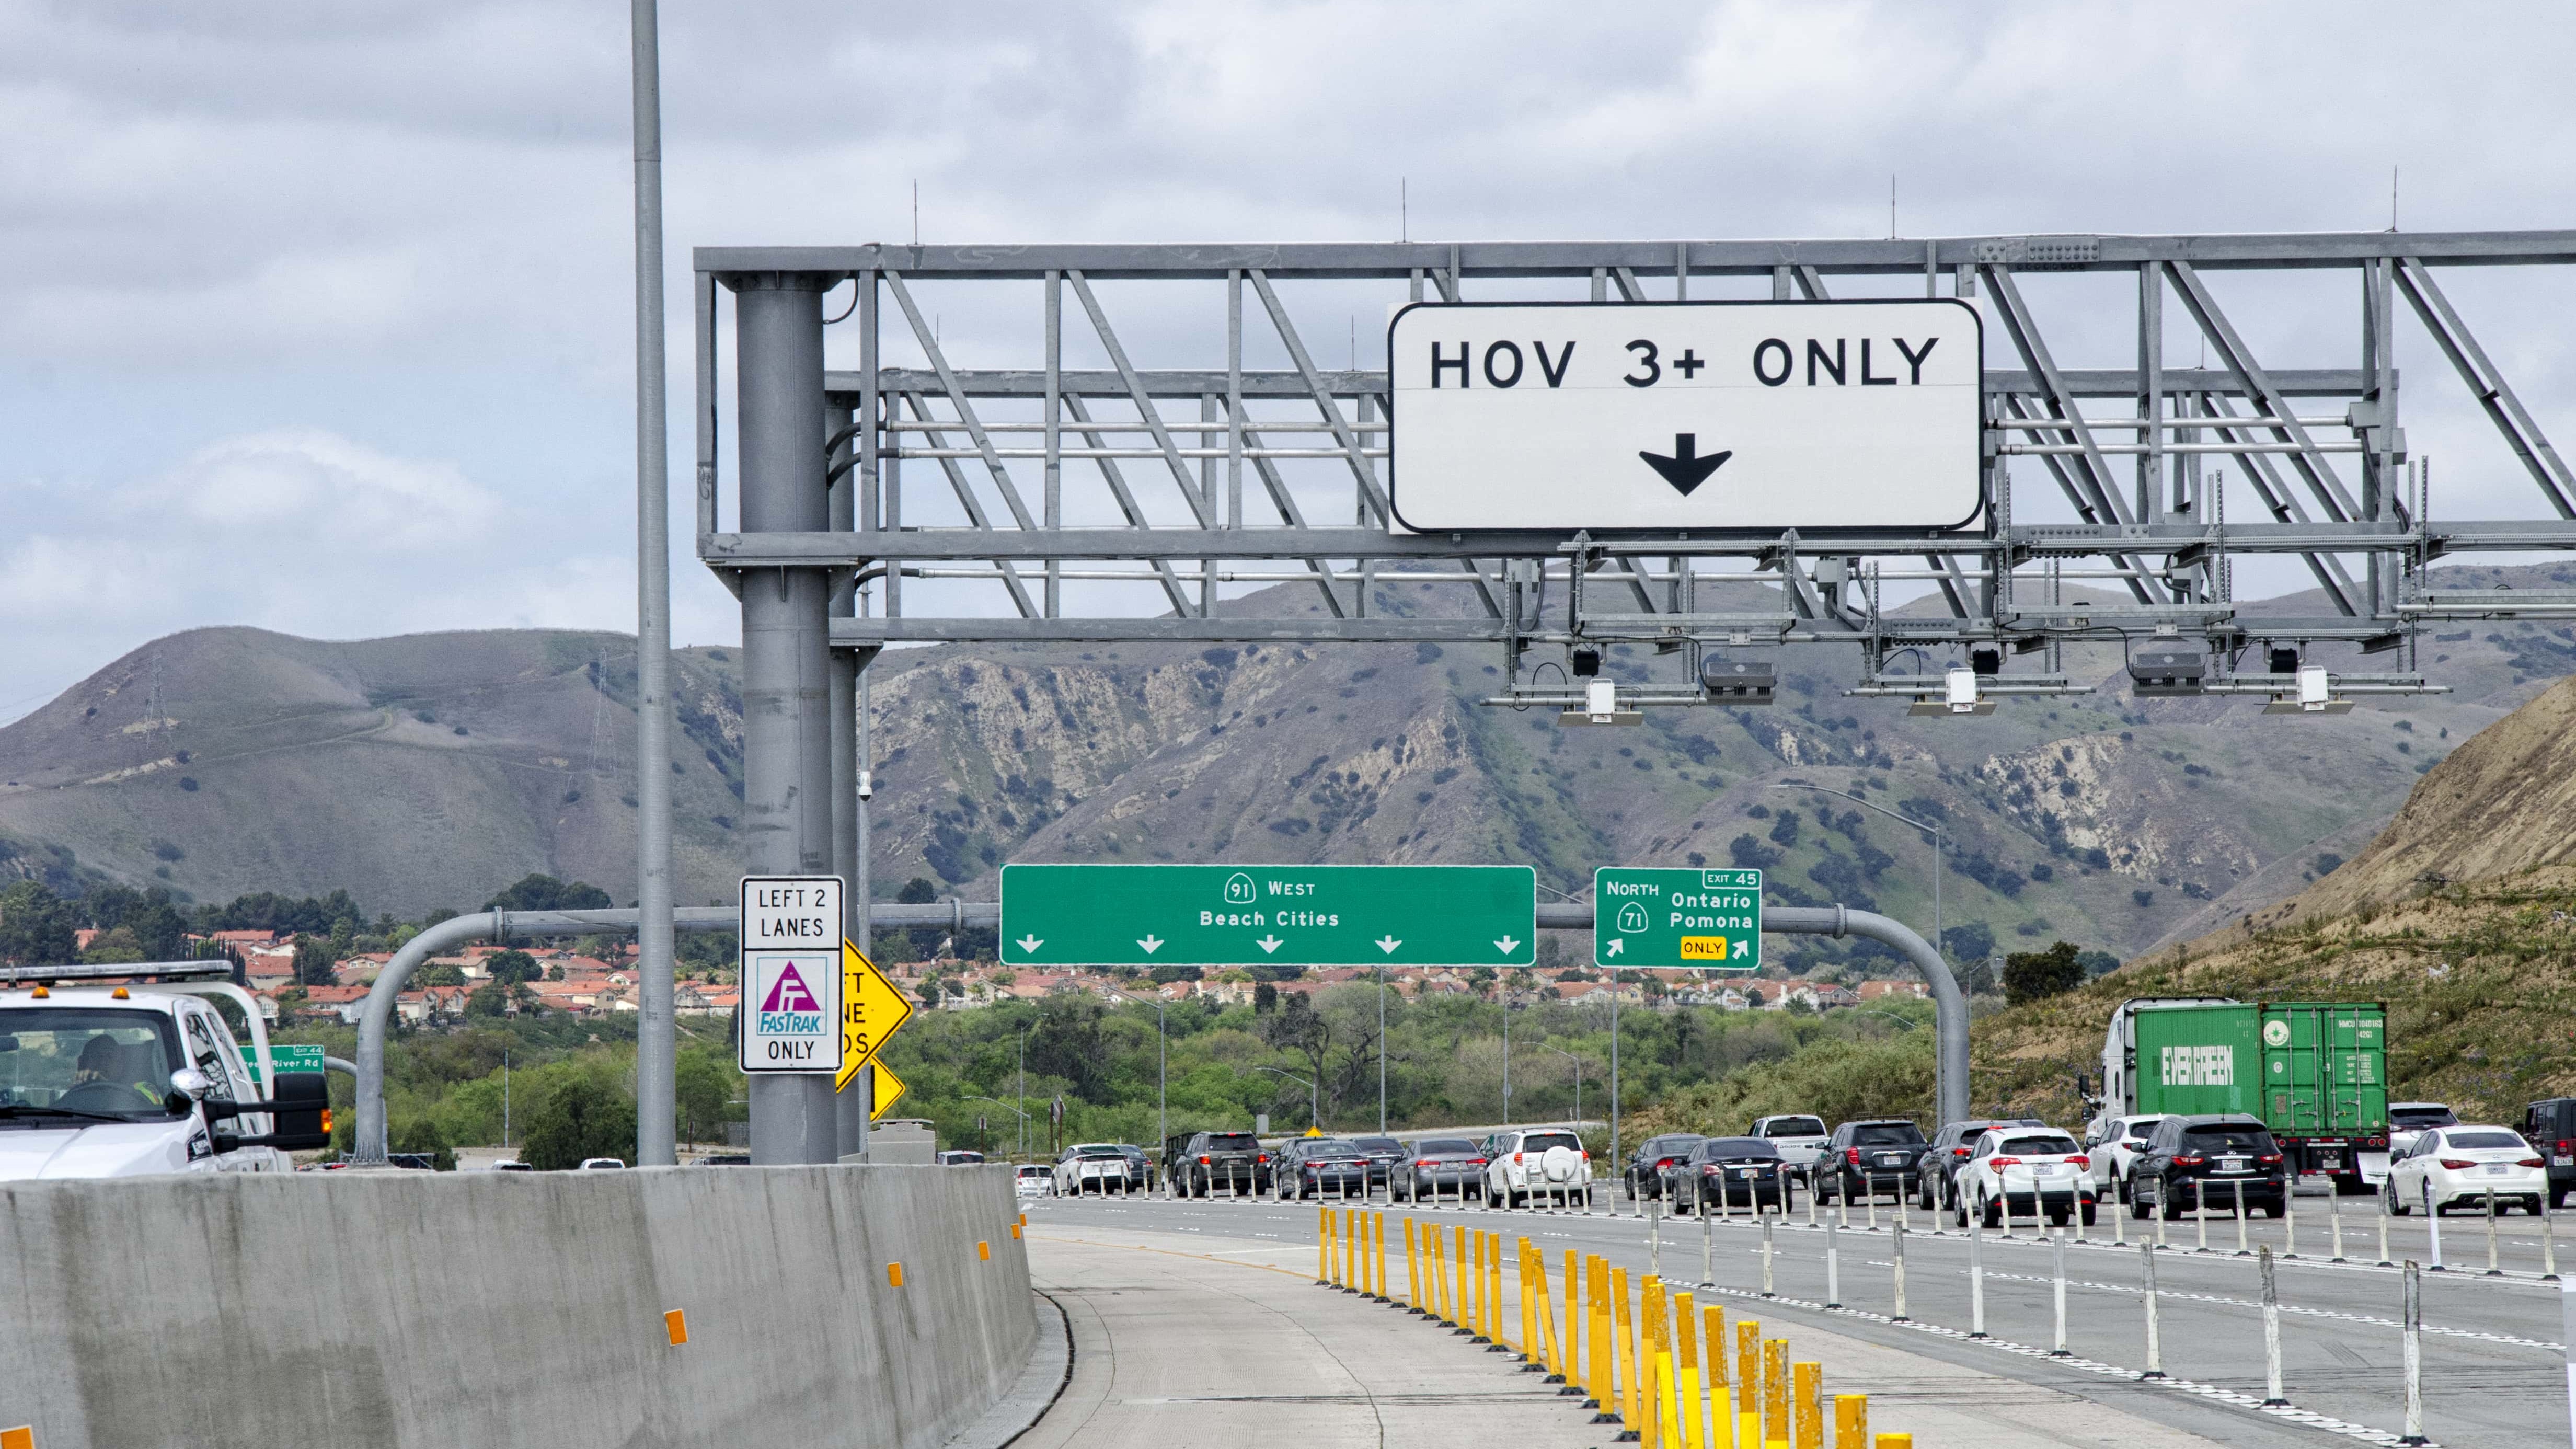 HOV 3 plus only sign